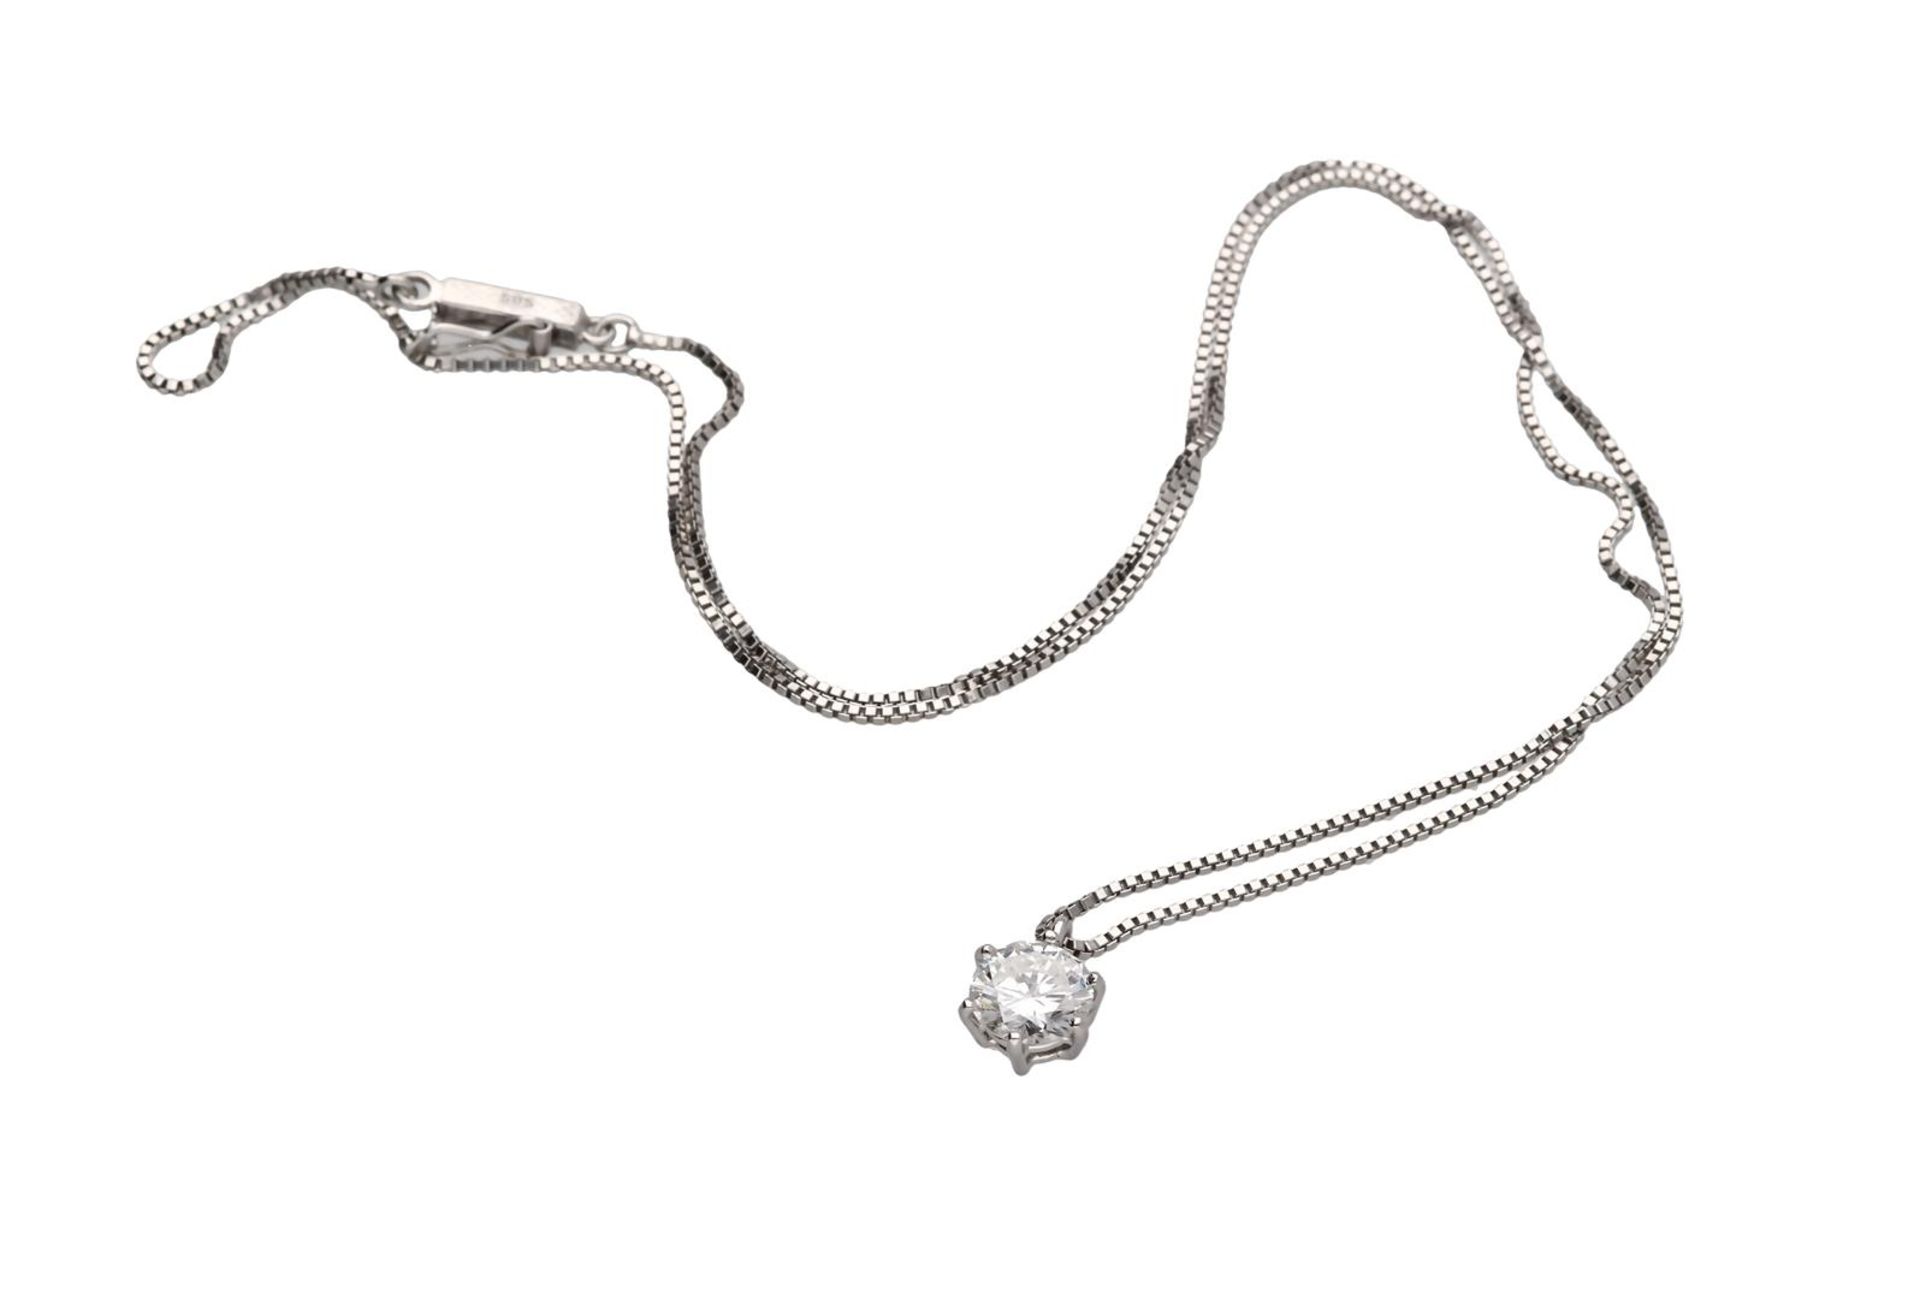 A 14-kt white gold venetian link necklace with soltaire pendant, set with a brilliant cut diamond of